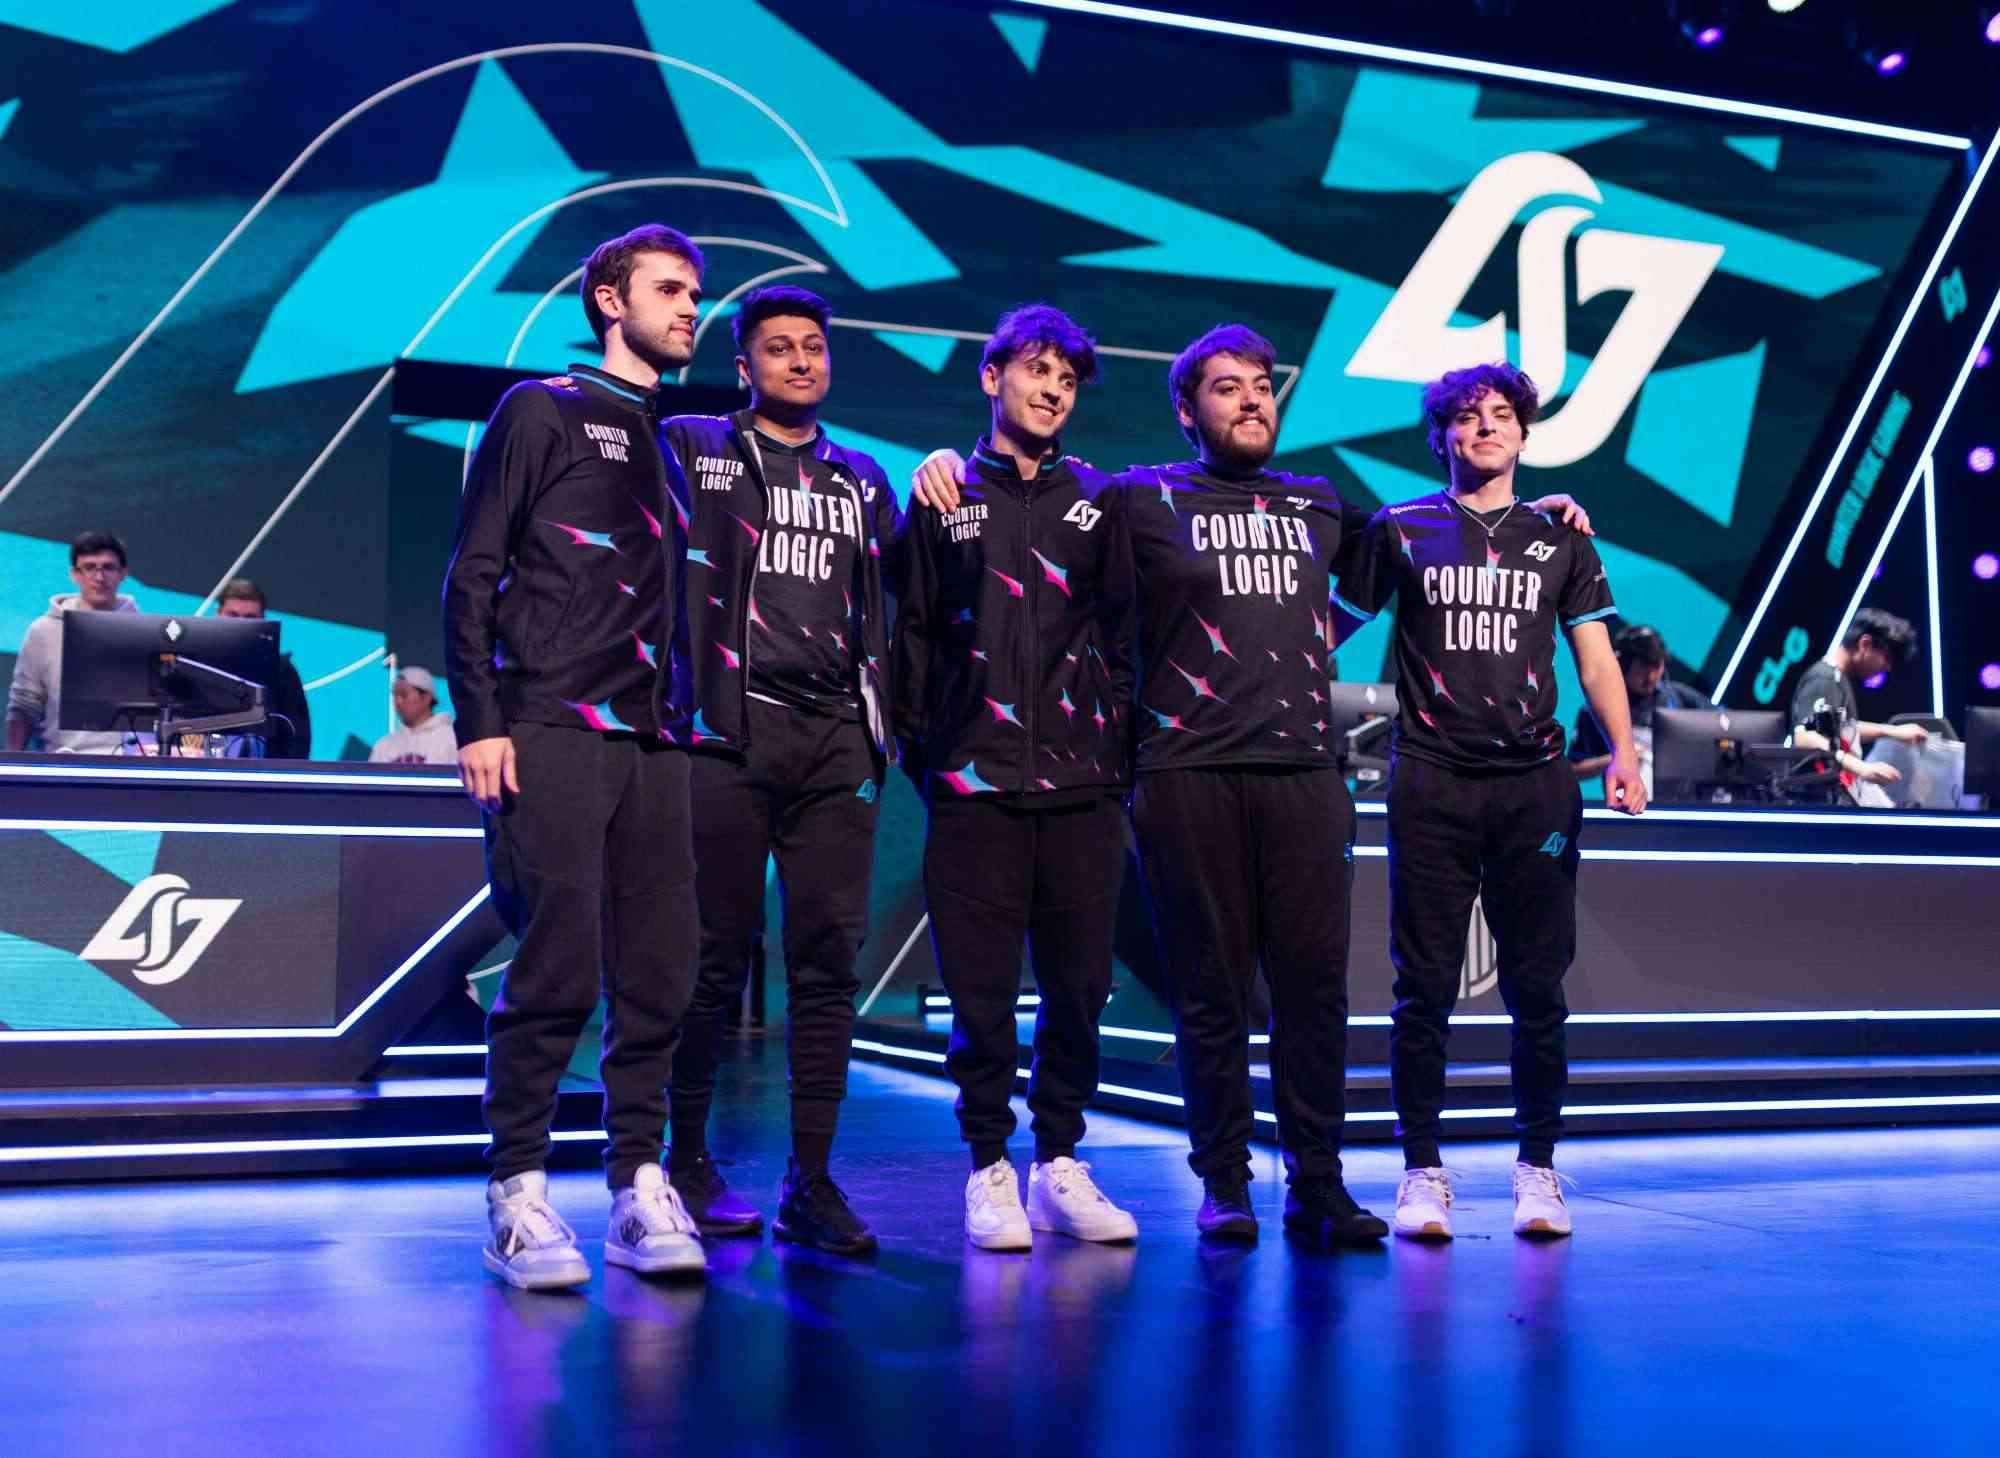 CLG also announced the farewell to League of Legends and the entire international Esports village